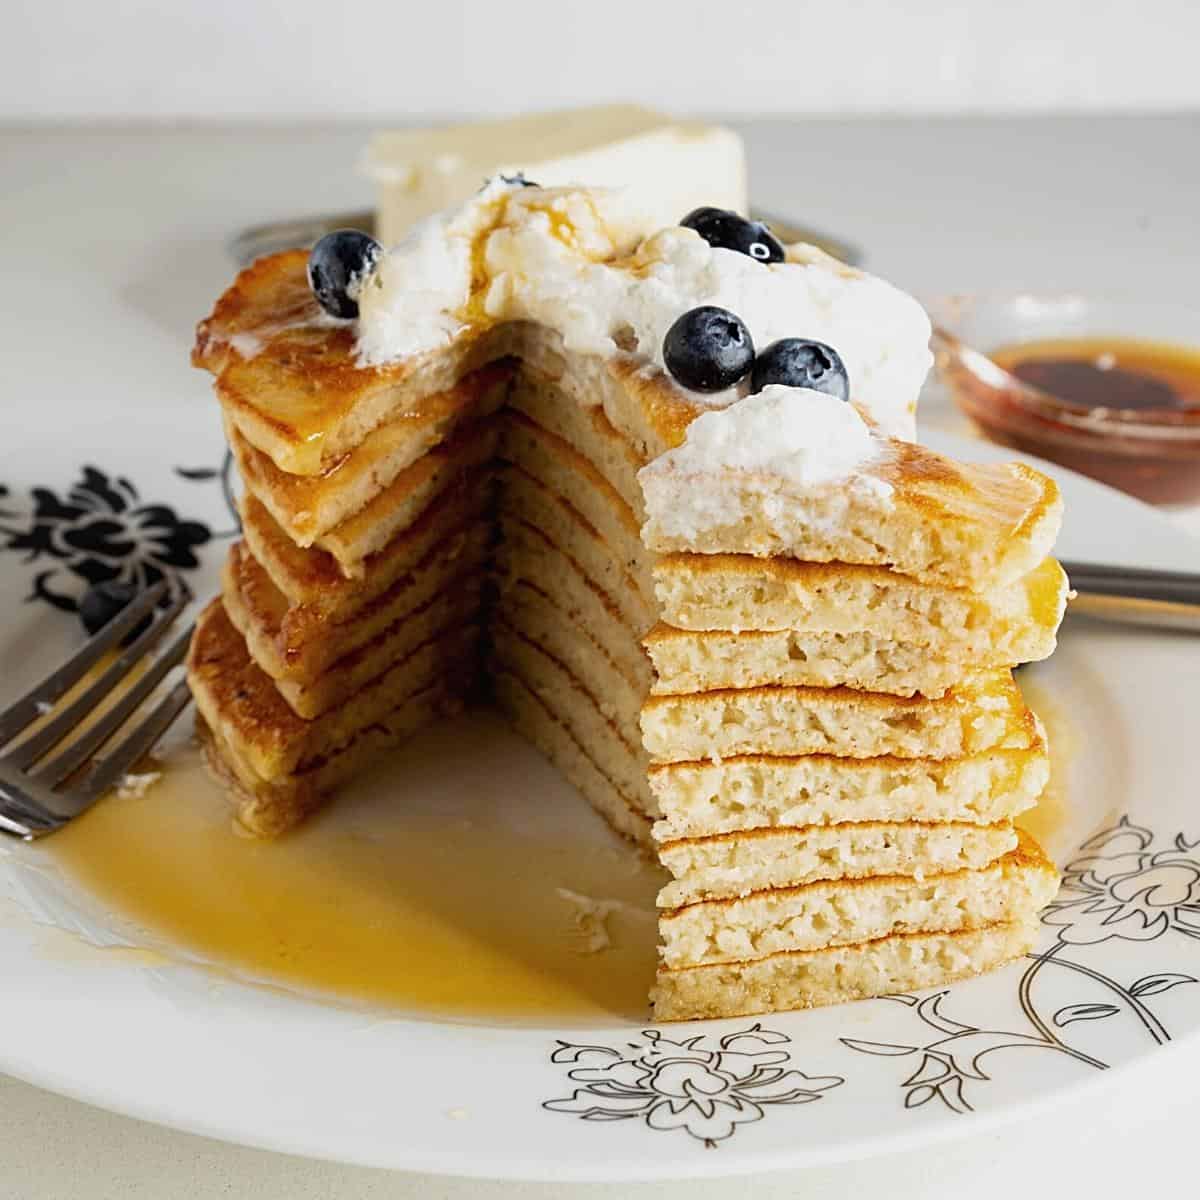 A sliced stack of pancakes with whipped cream and blueberries.